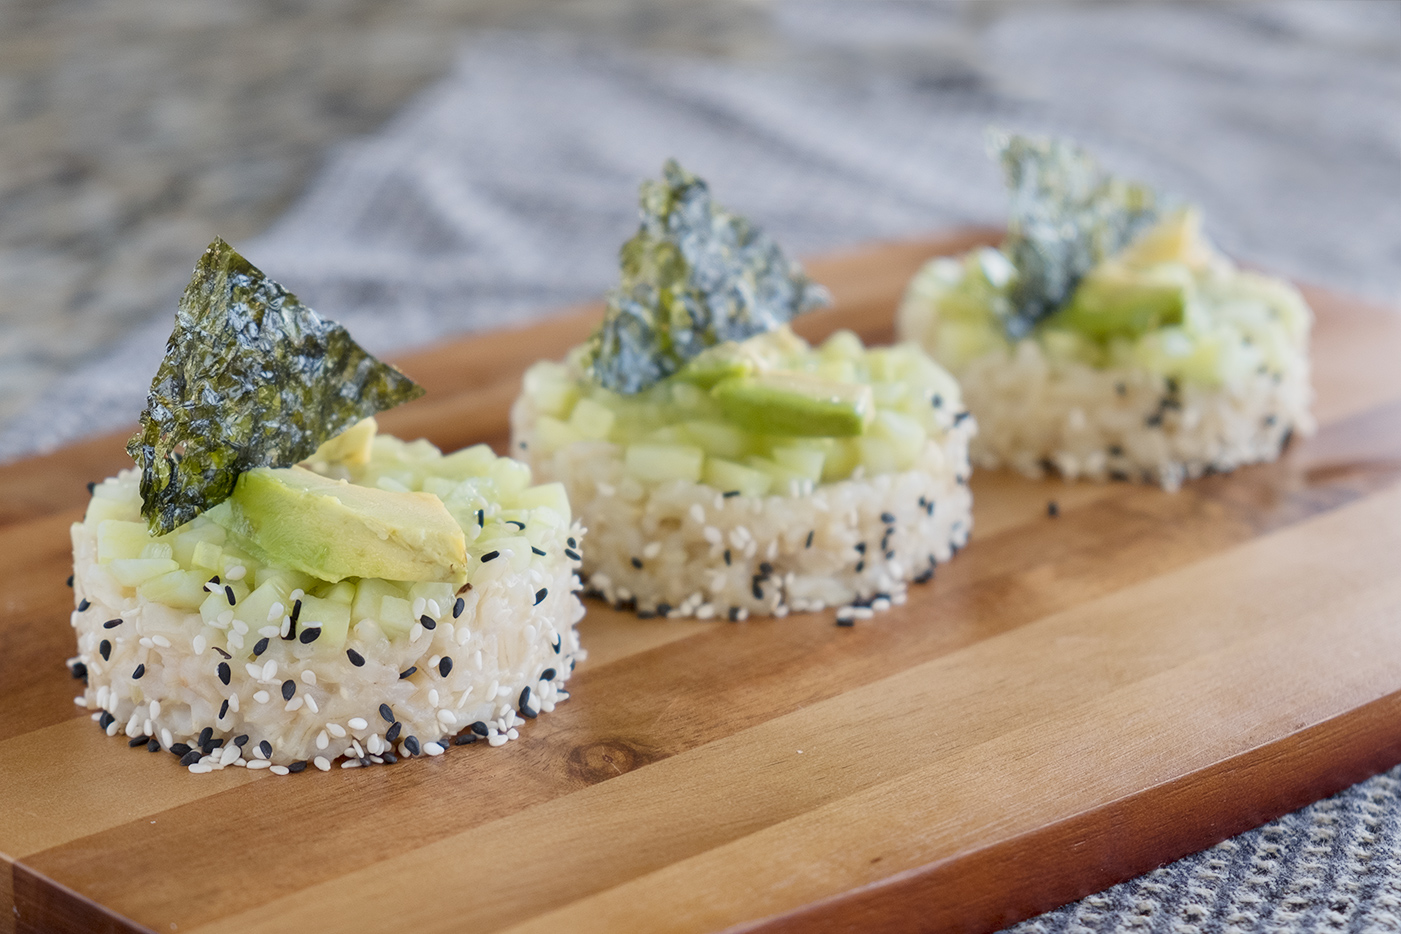 The freshest sushi around. Cure your sushi craving and get a dose of some fresh veggies with this gluten free recipe.